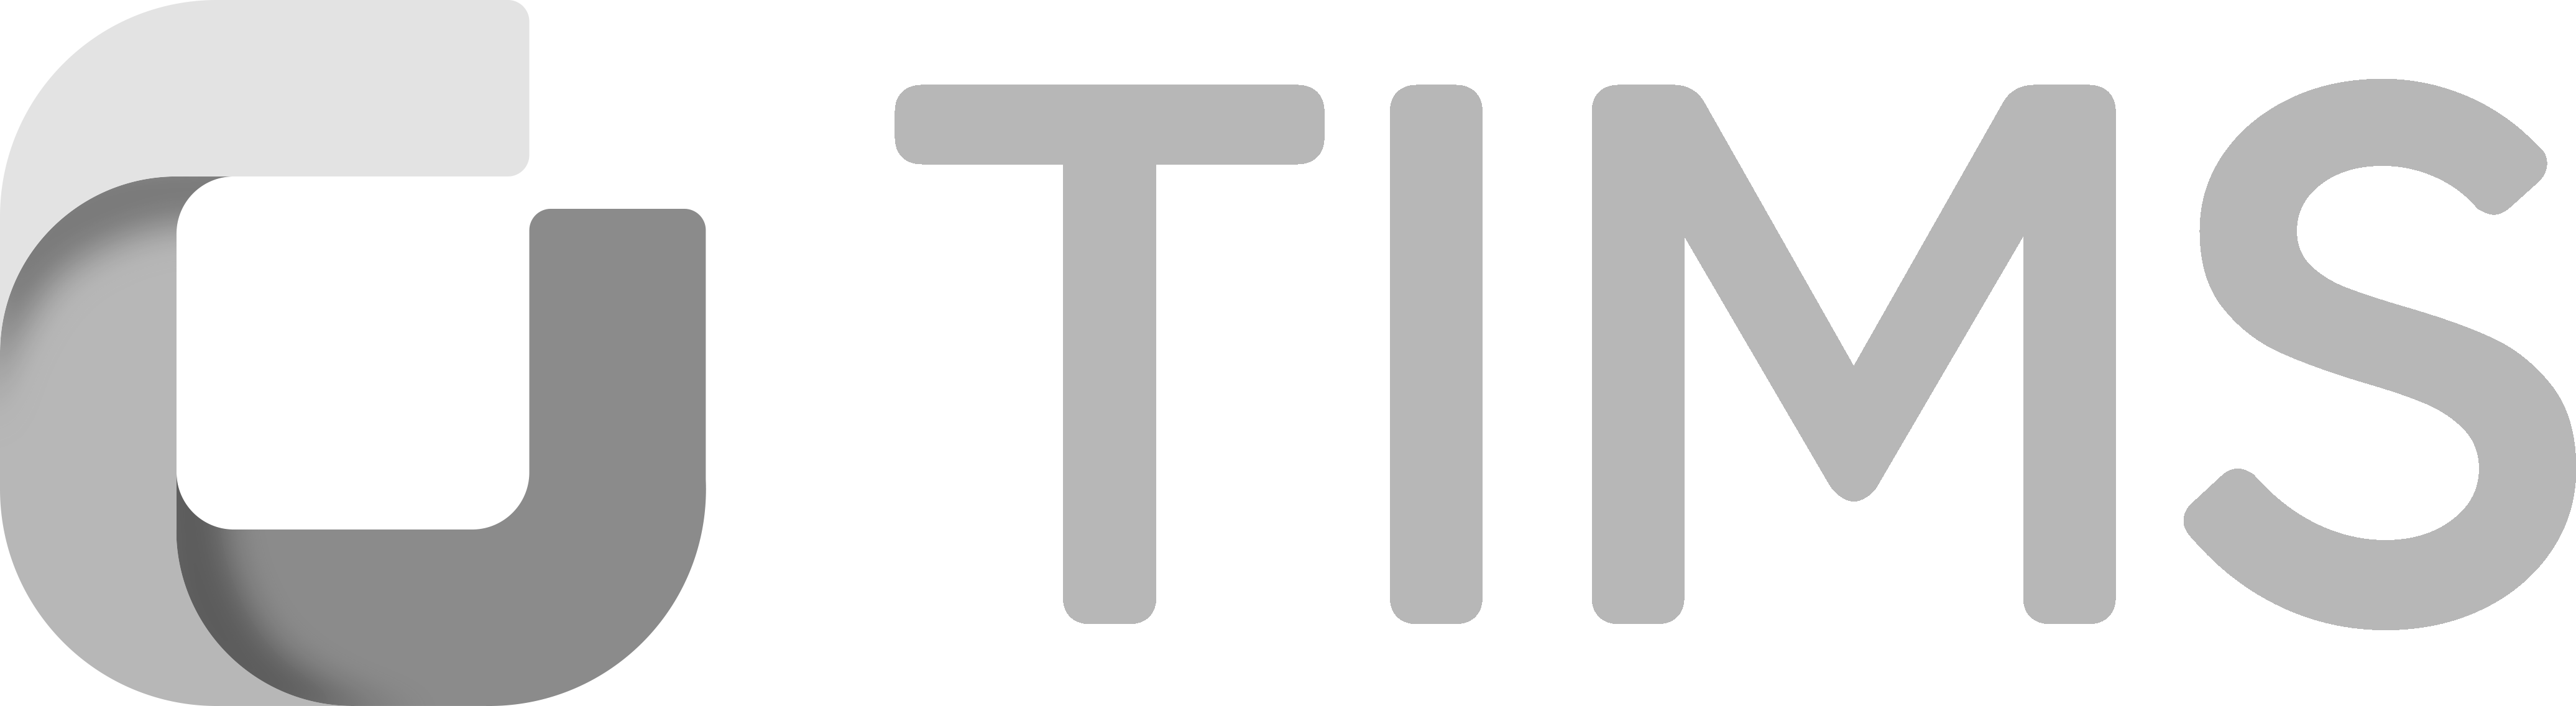 TIMS_Logo_GRAYScale_Reverse_Final